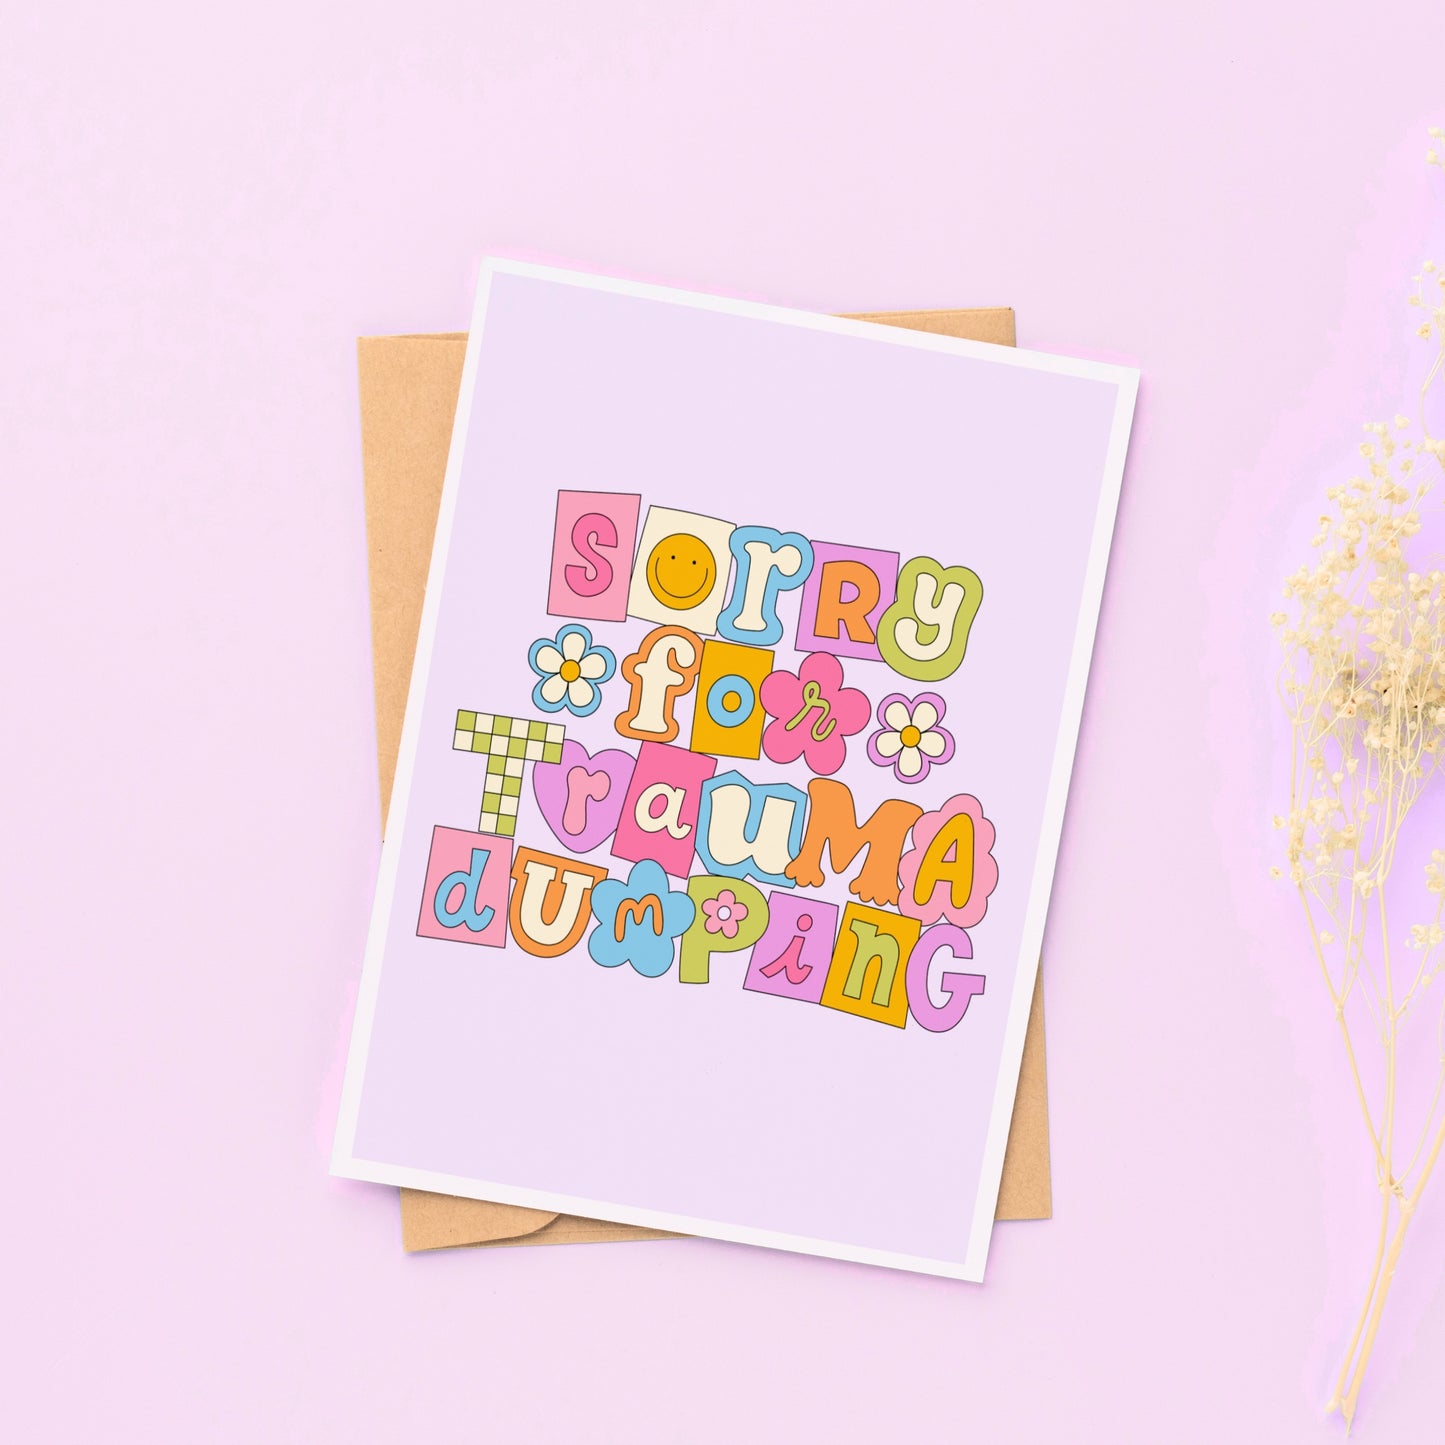 Sorry for Trauma Dumping - Funny Greeting Card